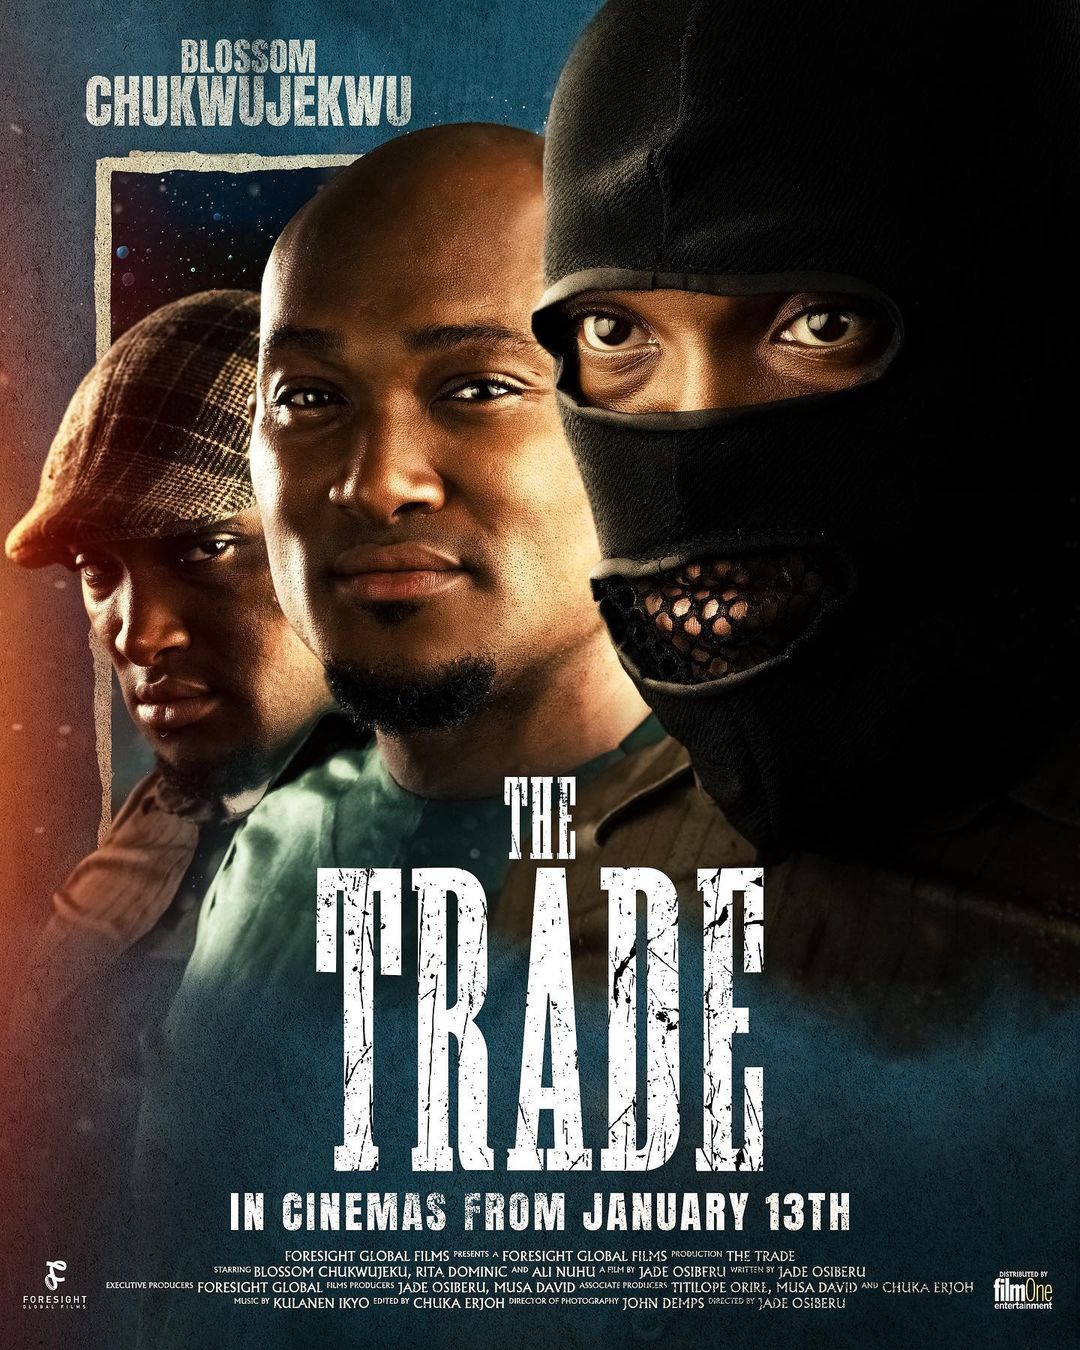 324232260 541773354566002 1635190405076650373 n - David Musa on Co- Producing “The Trade” Movie That Took 4 Years (Exclusive)